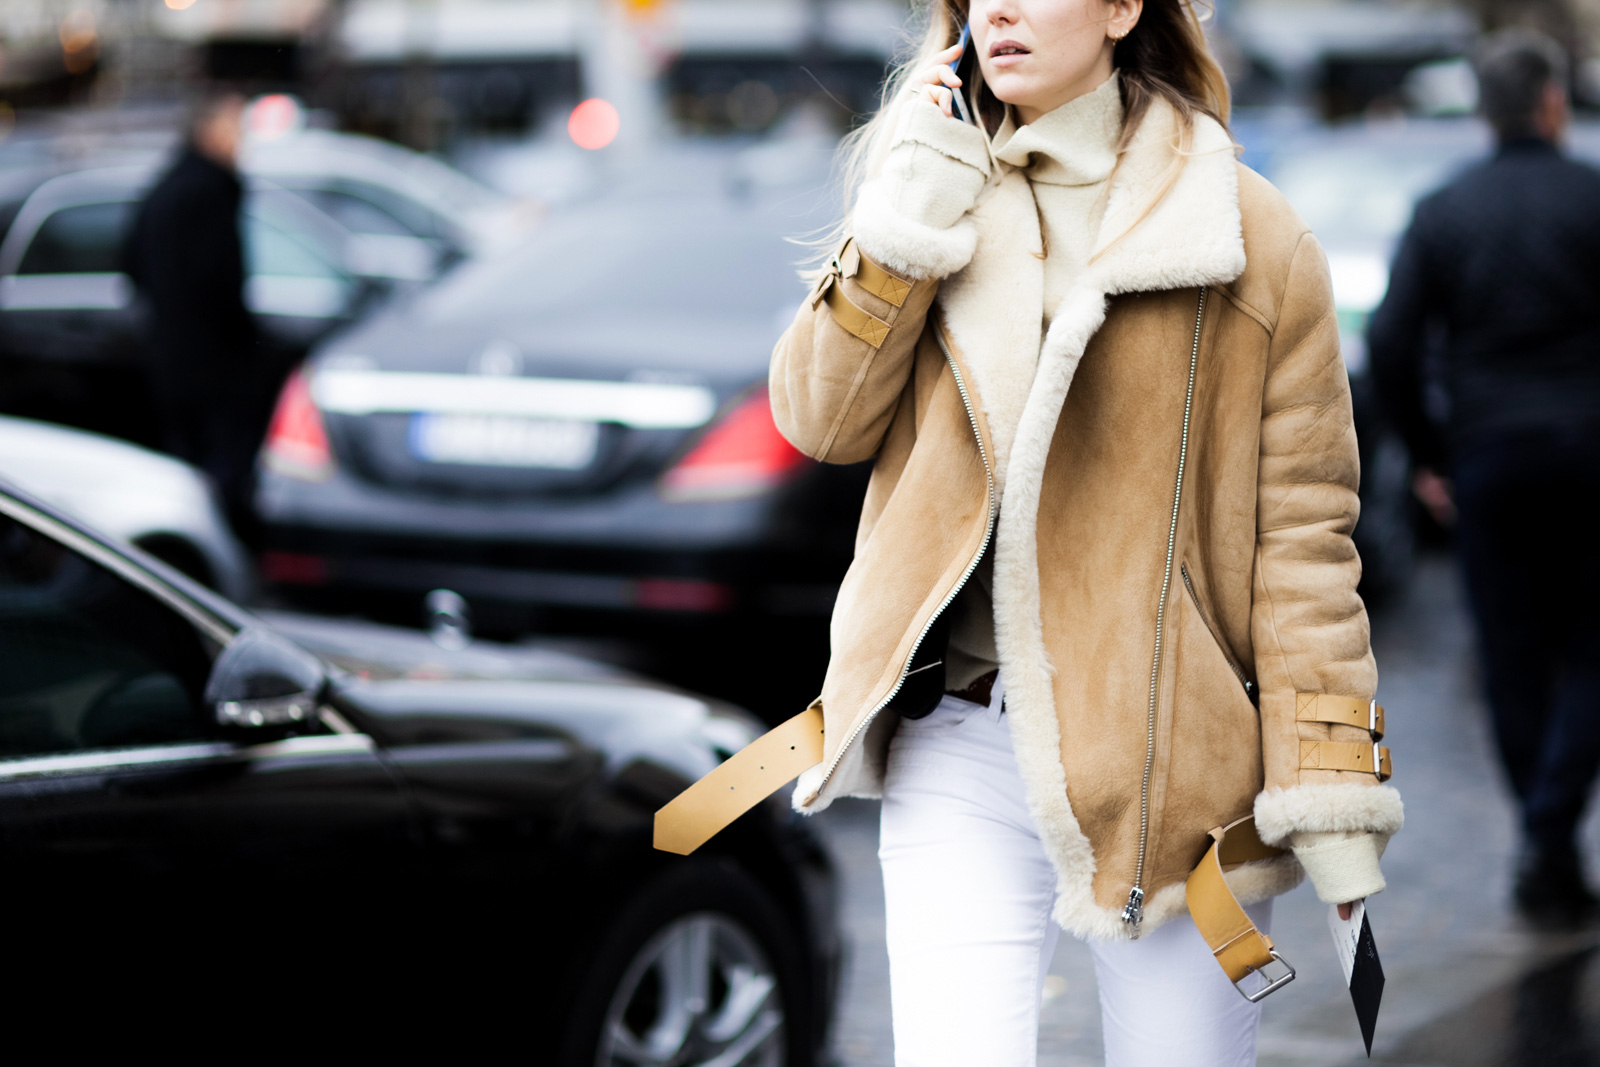 Jennifer Neyt wearing white jeans and Acne Studios shearling jacket after the Elie Saab Haute Couture fashion show in Paris, France